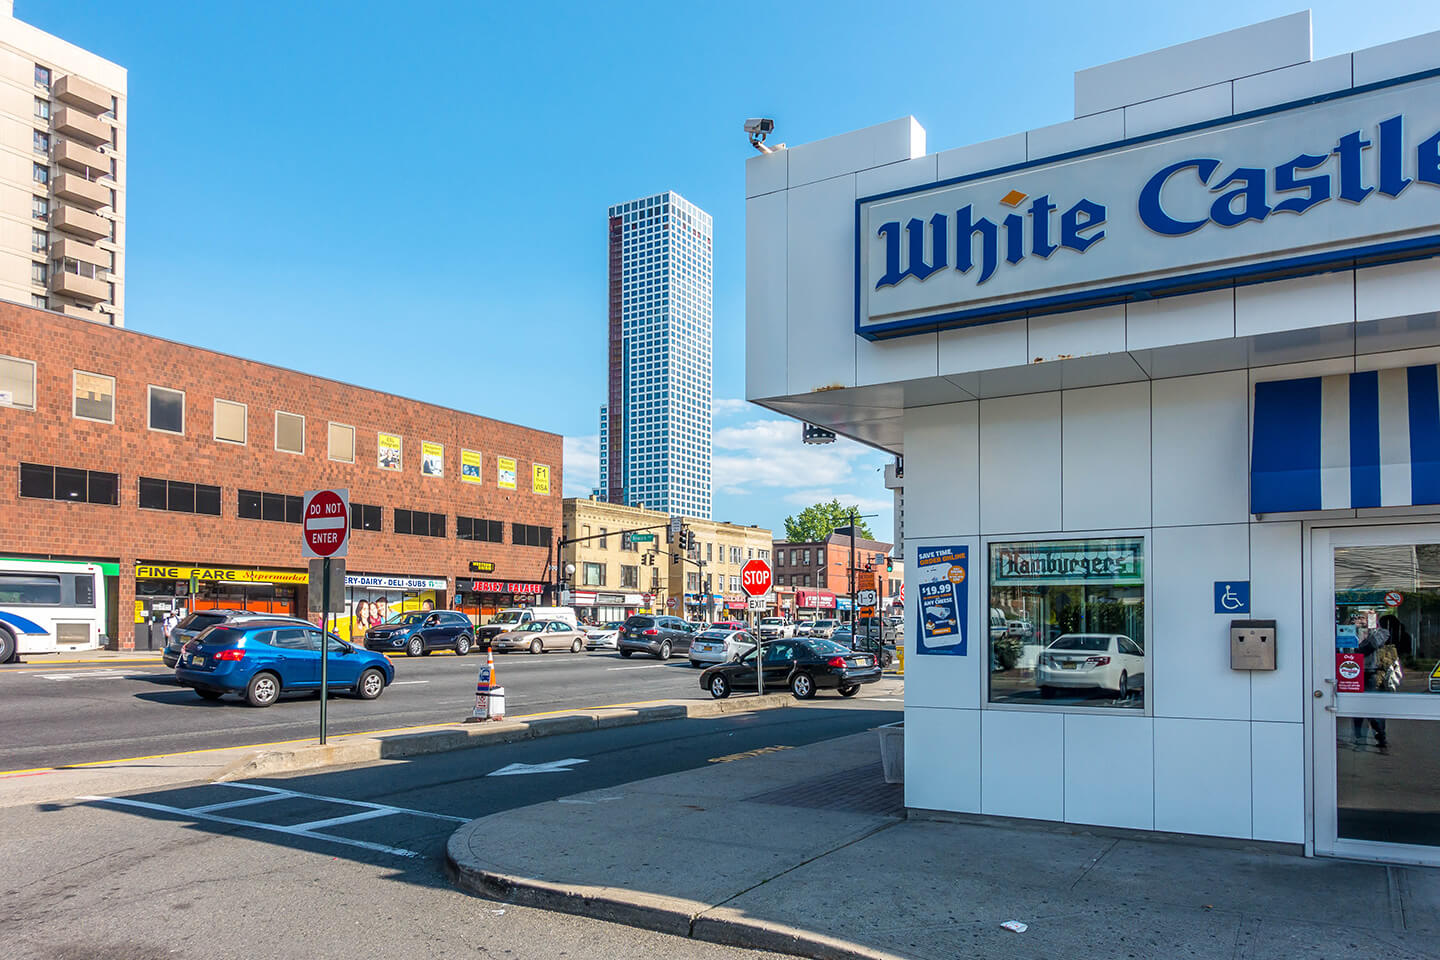 And of course, White Castle